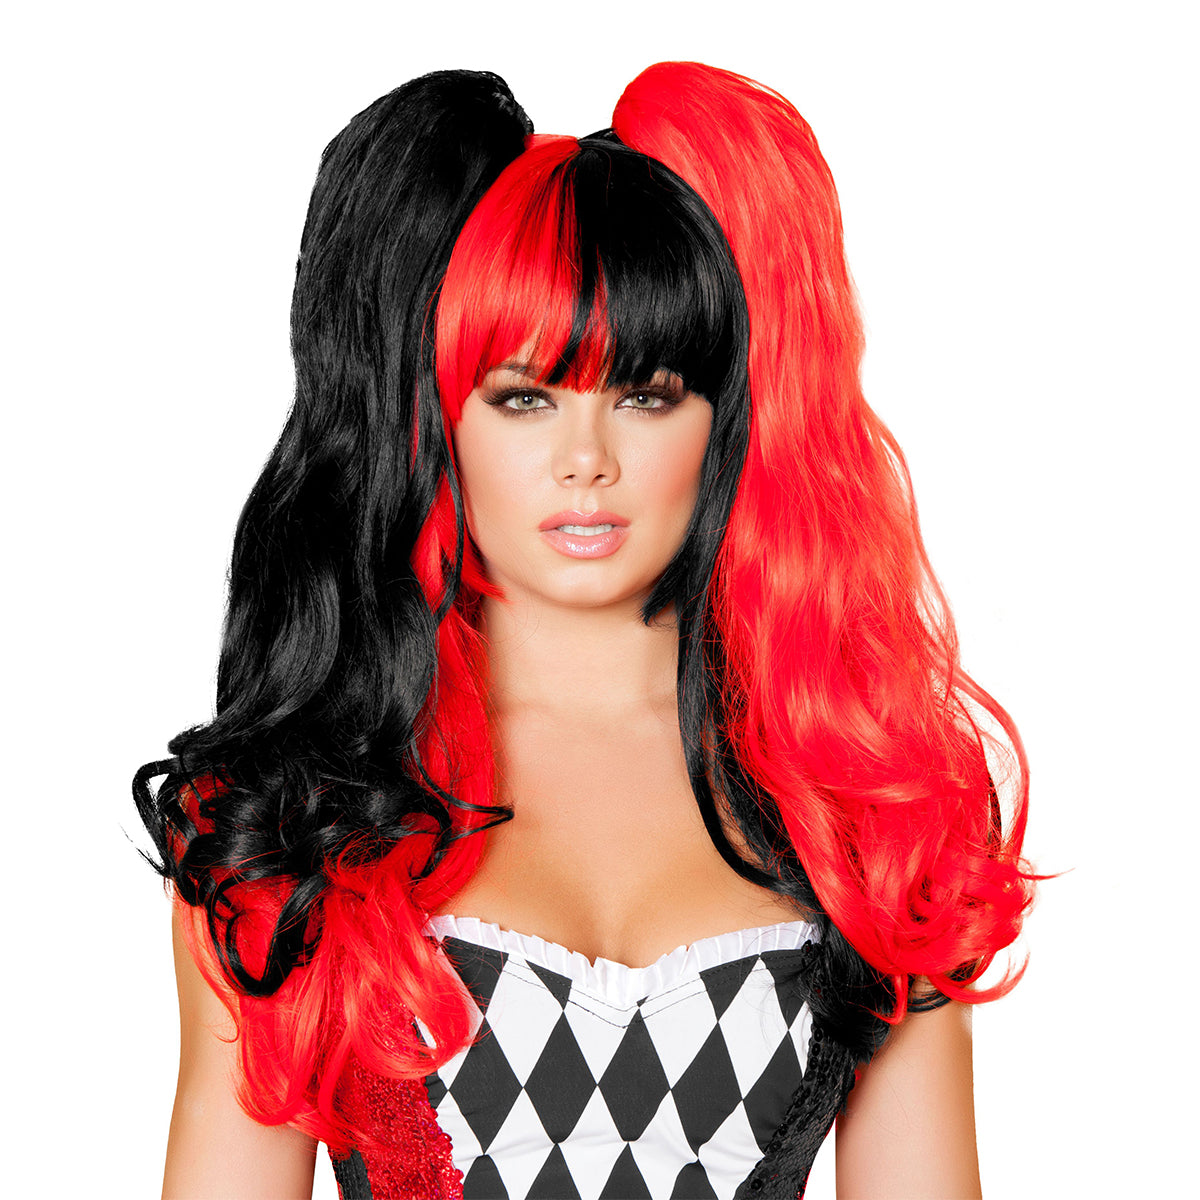 Red and Black Wig